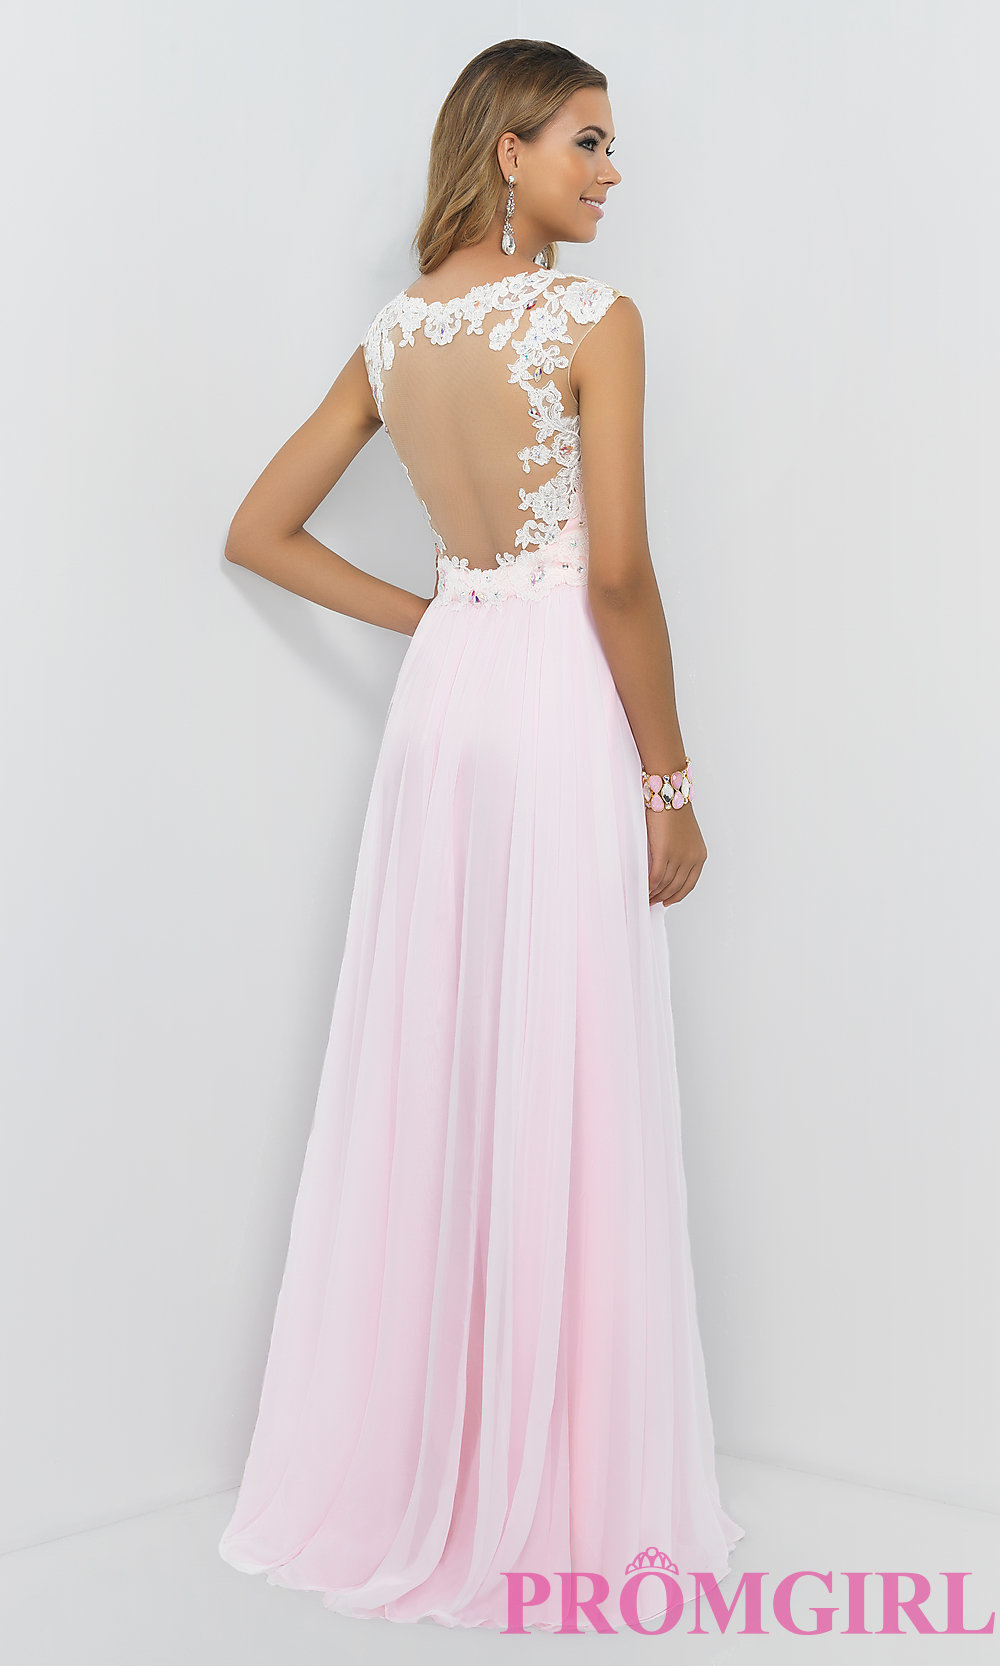 blush prom dresses hover to zoom YIHMGWR